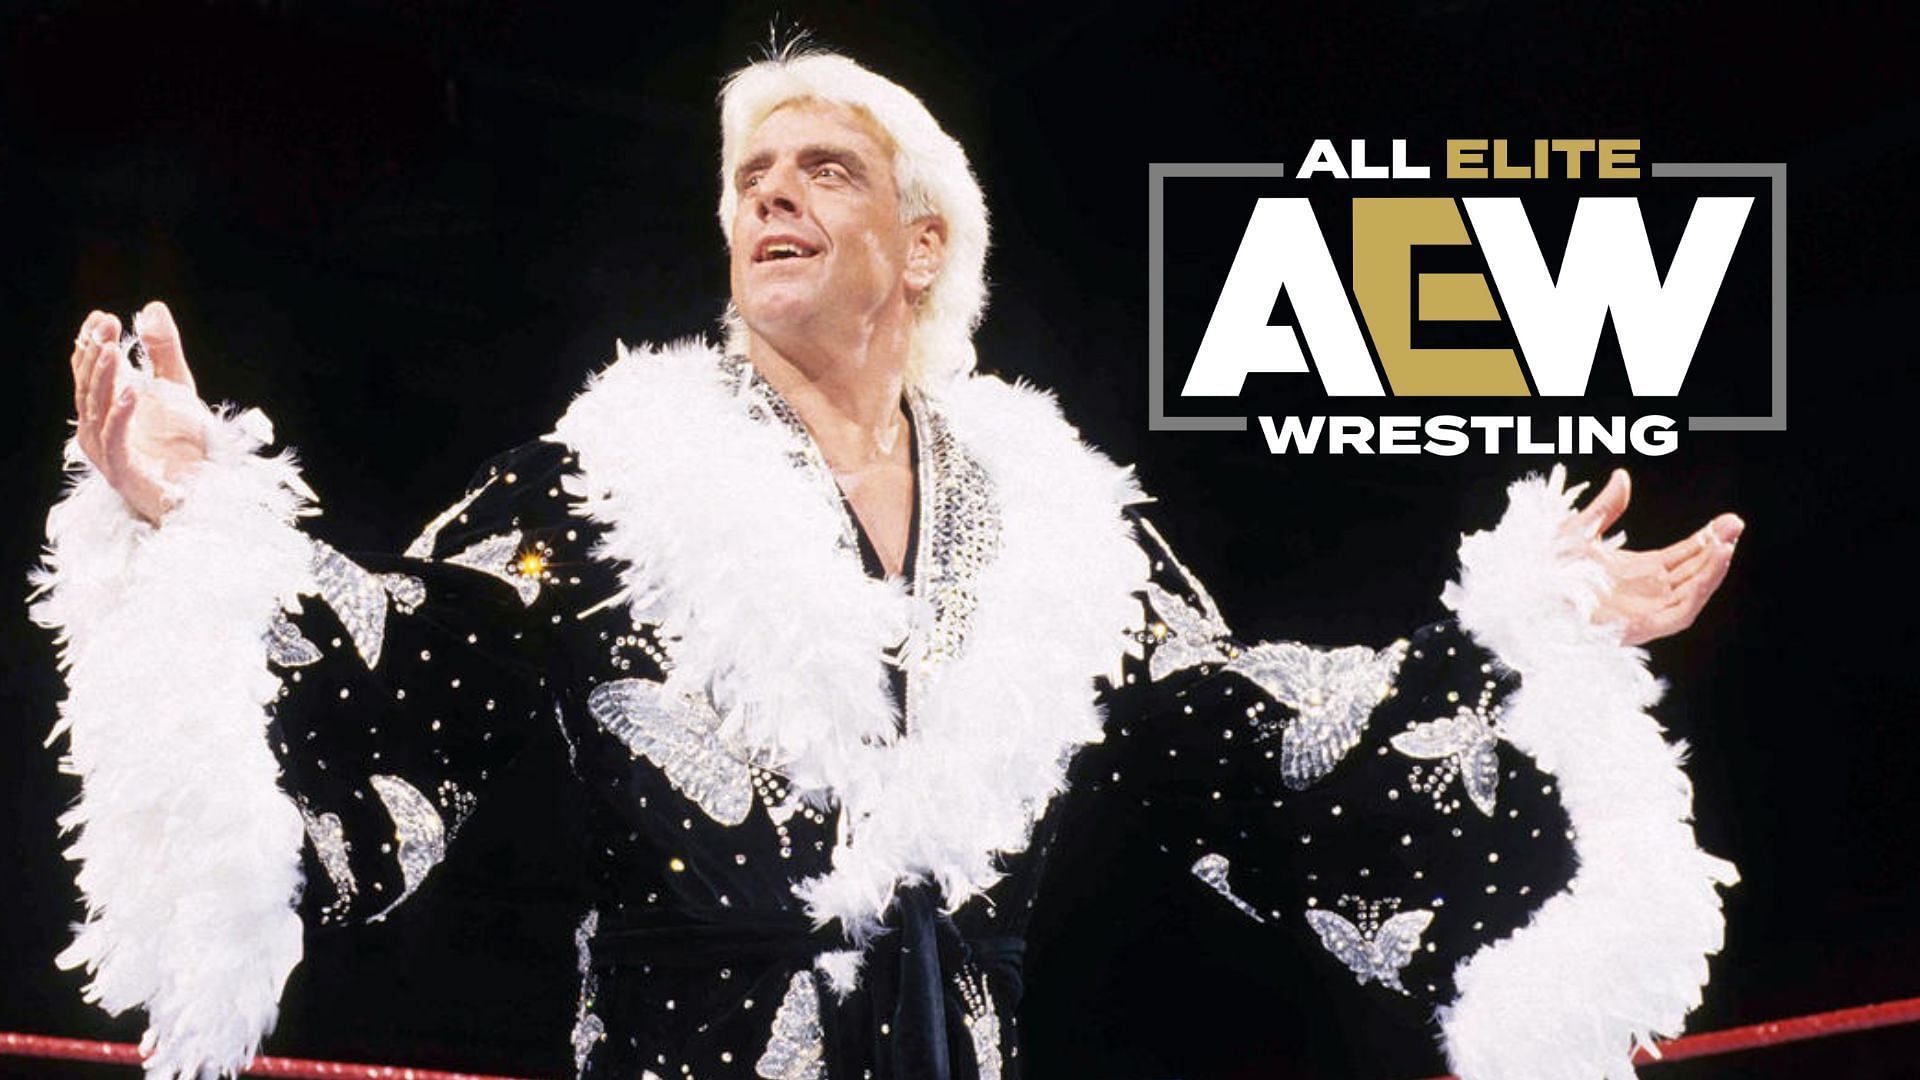 Ric Flair is considered one of the best wrestlers of all time.